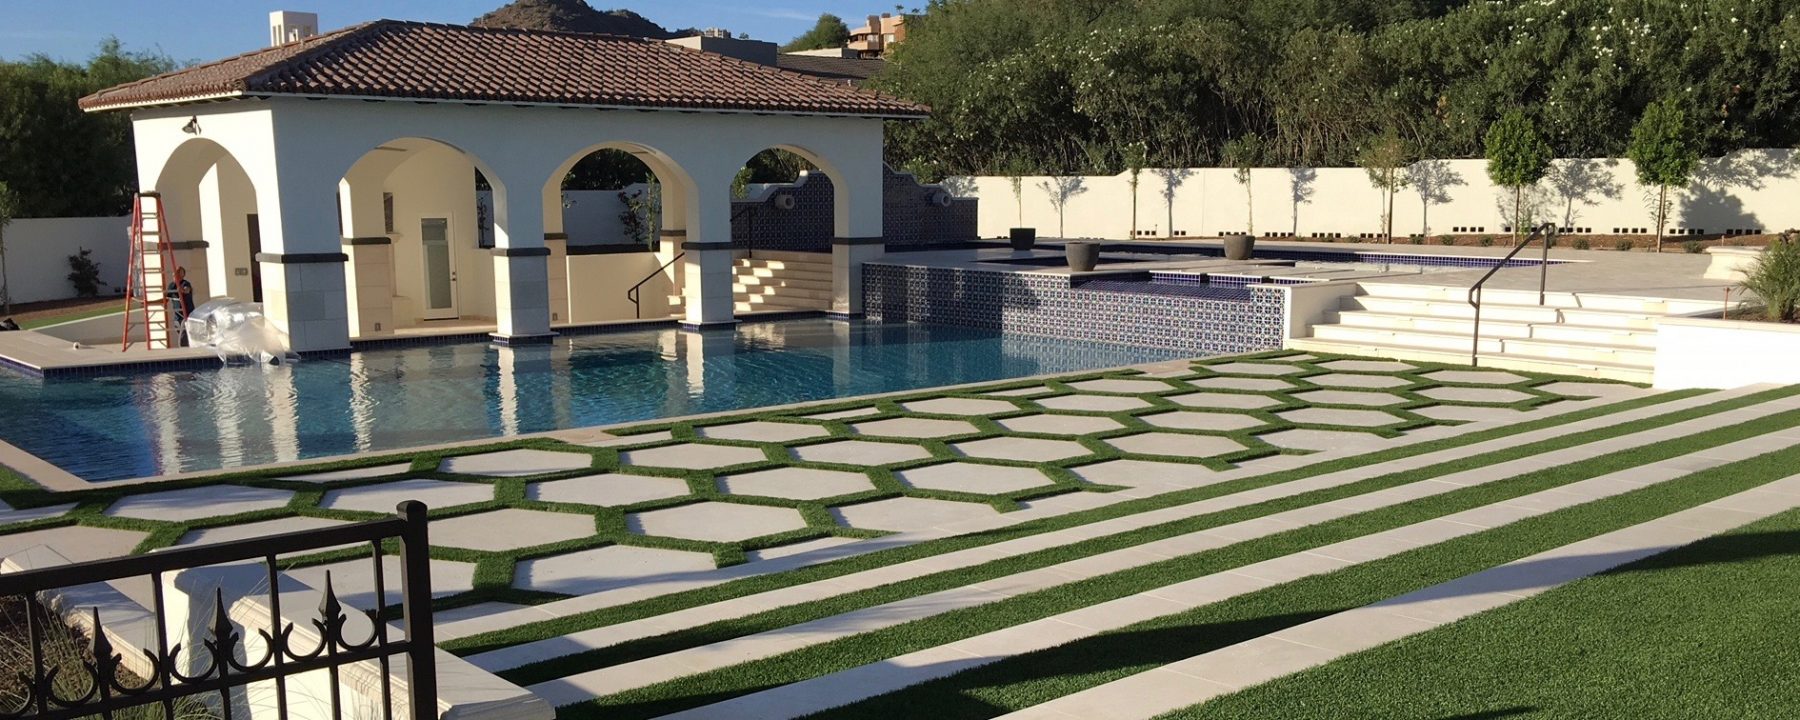 Pavers, Pool Coping, Custom Dark Color Design Accent using Manufactured Stone Panels